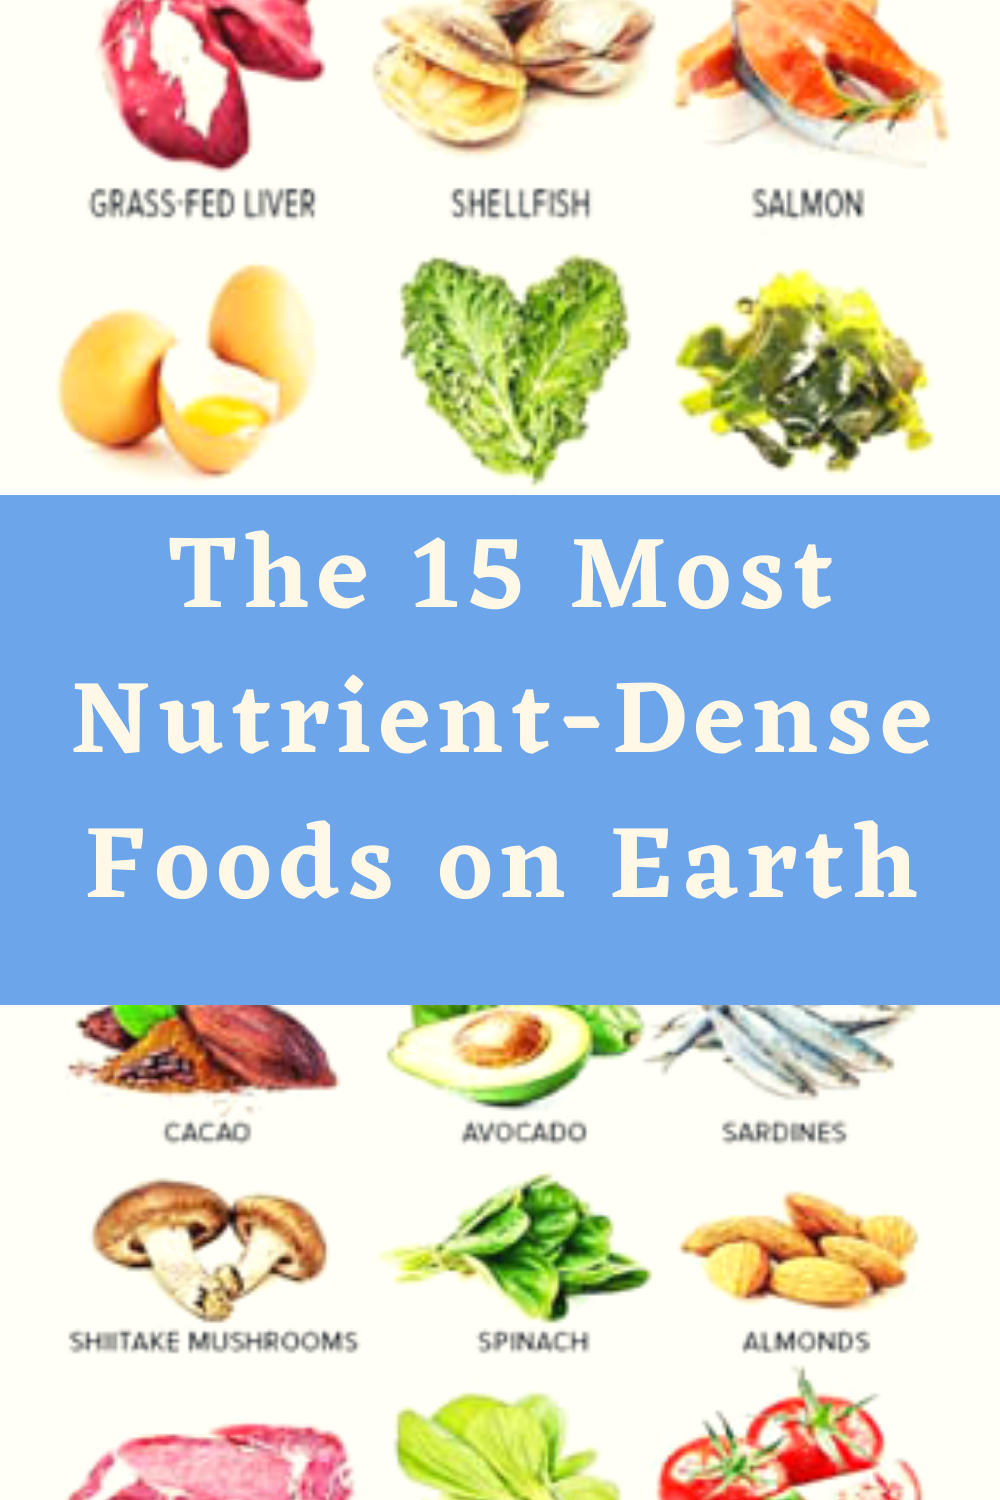 The 15 Most Nutrient-Dense Foods on Earth